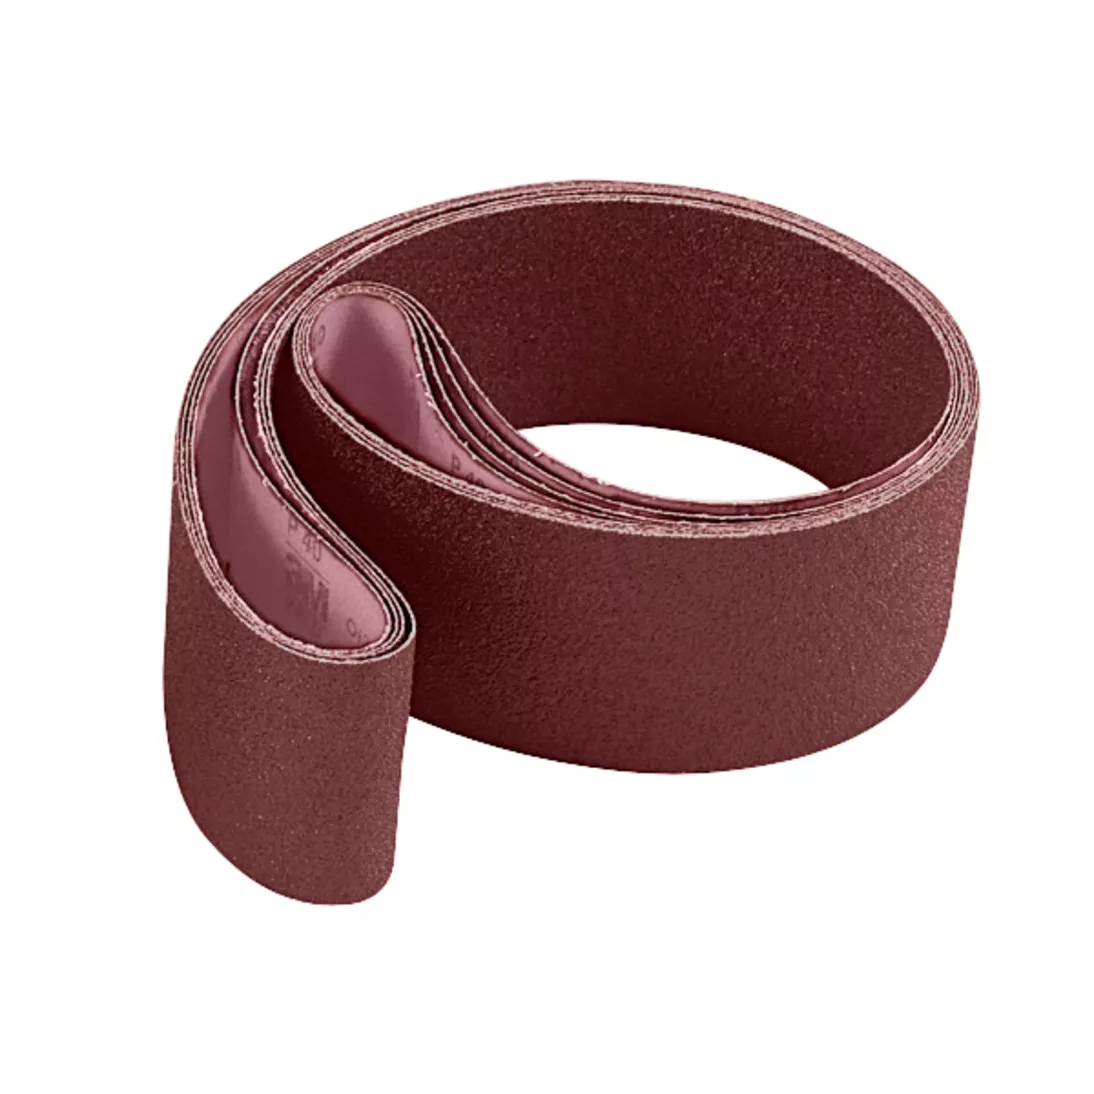 Scotch-Brite™ Surface Conditioning Low Stretch Belt, 1 in x 15.5 in, S
MED, 10 ea/Case, Restricted